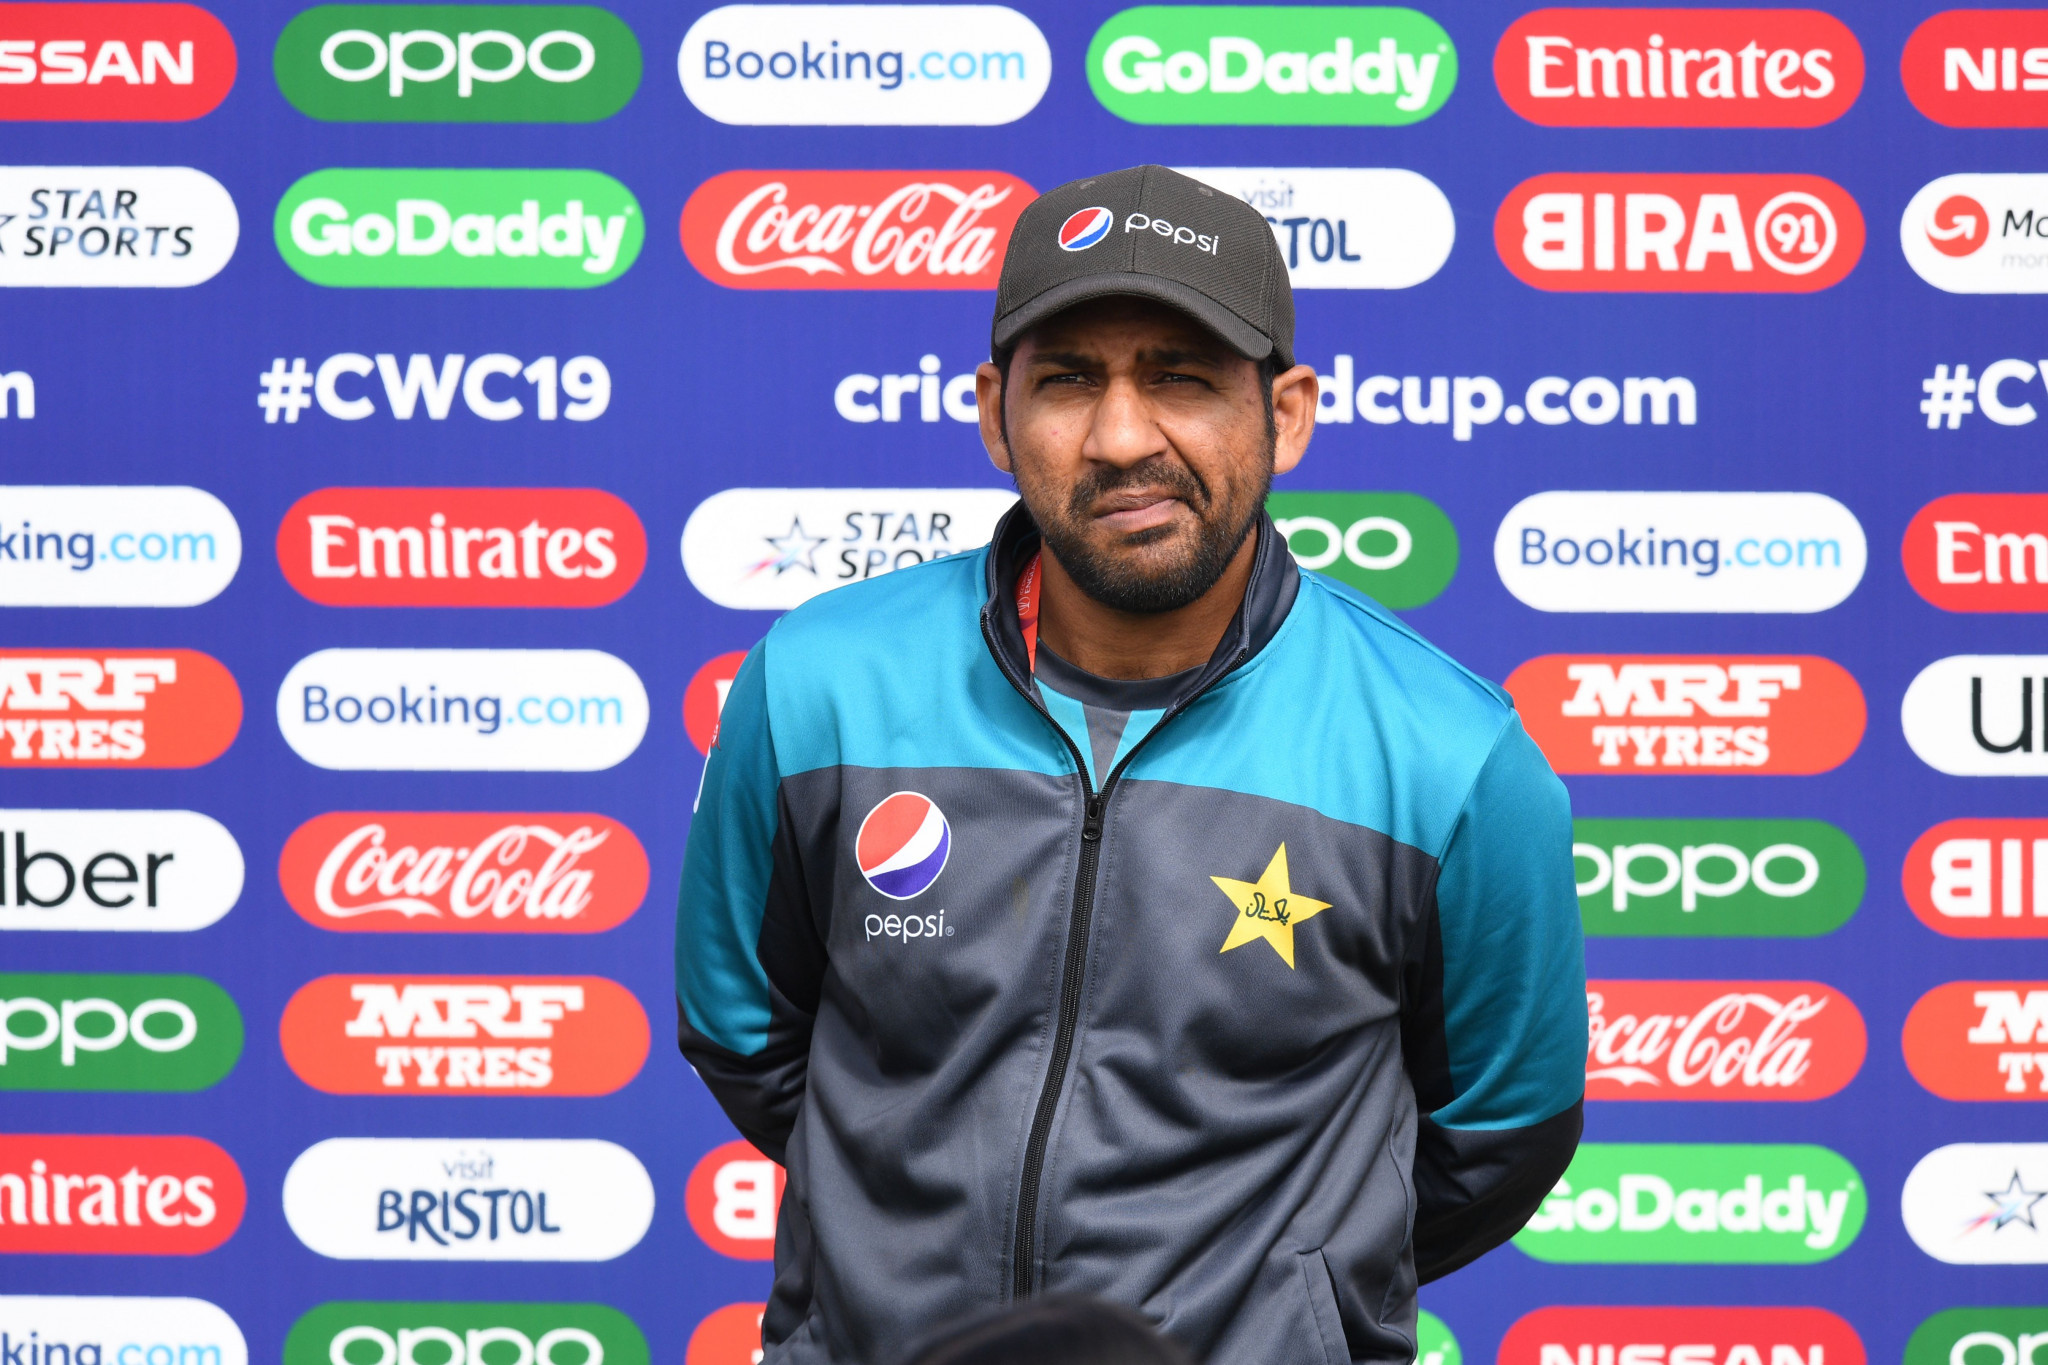 Pakistan captain Sarfaraz Ahmed spoke to the media following the abandonment of his team's match against Sri Lanka after persistent rain at Bristol County Ground today ©Getty Images